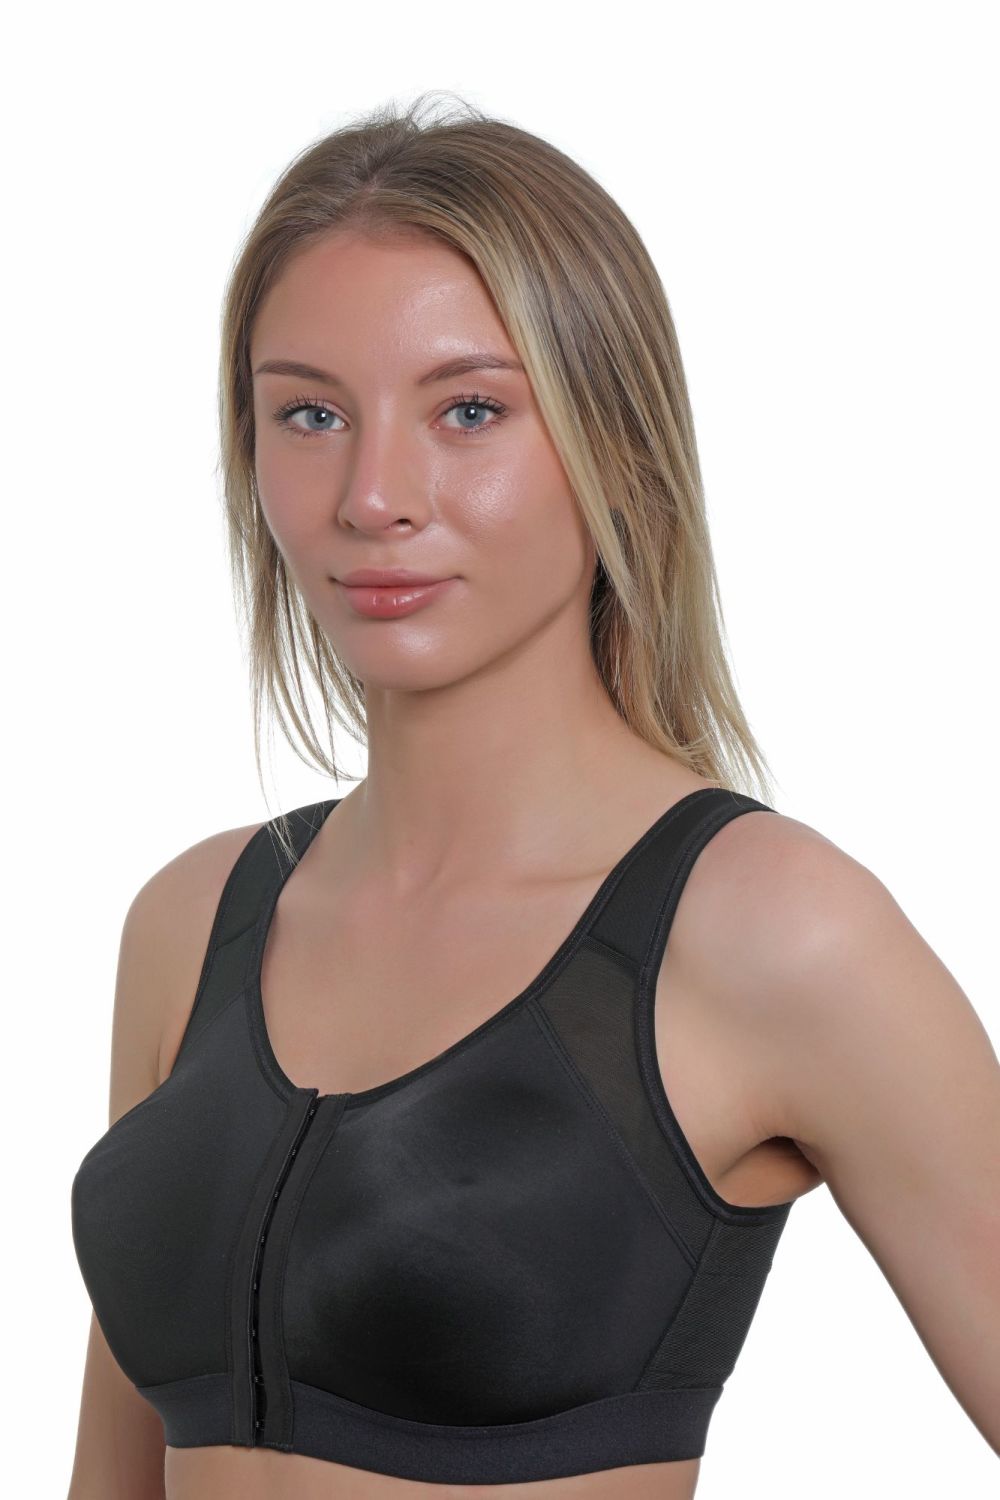 Special OFFER ! LG888 - FRONT FASTENING SPORTS BRA 34B to 46J. 200 PCS - £5  each